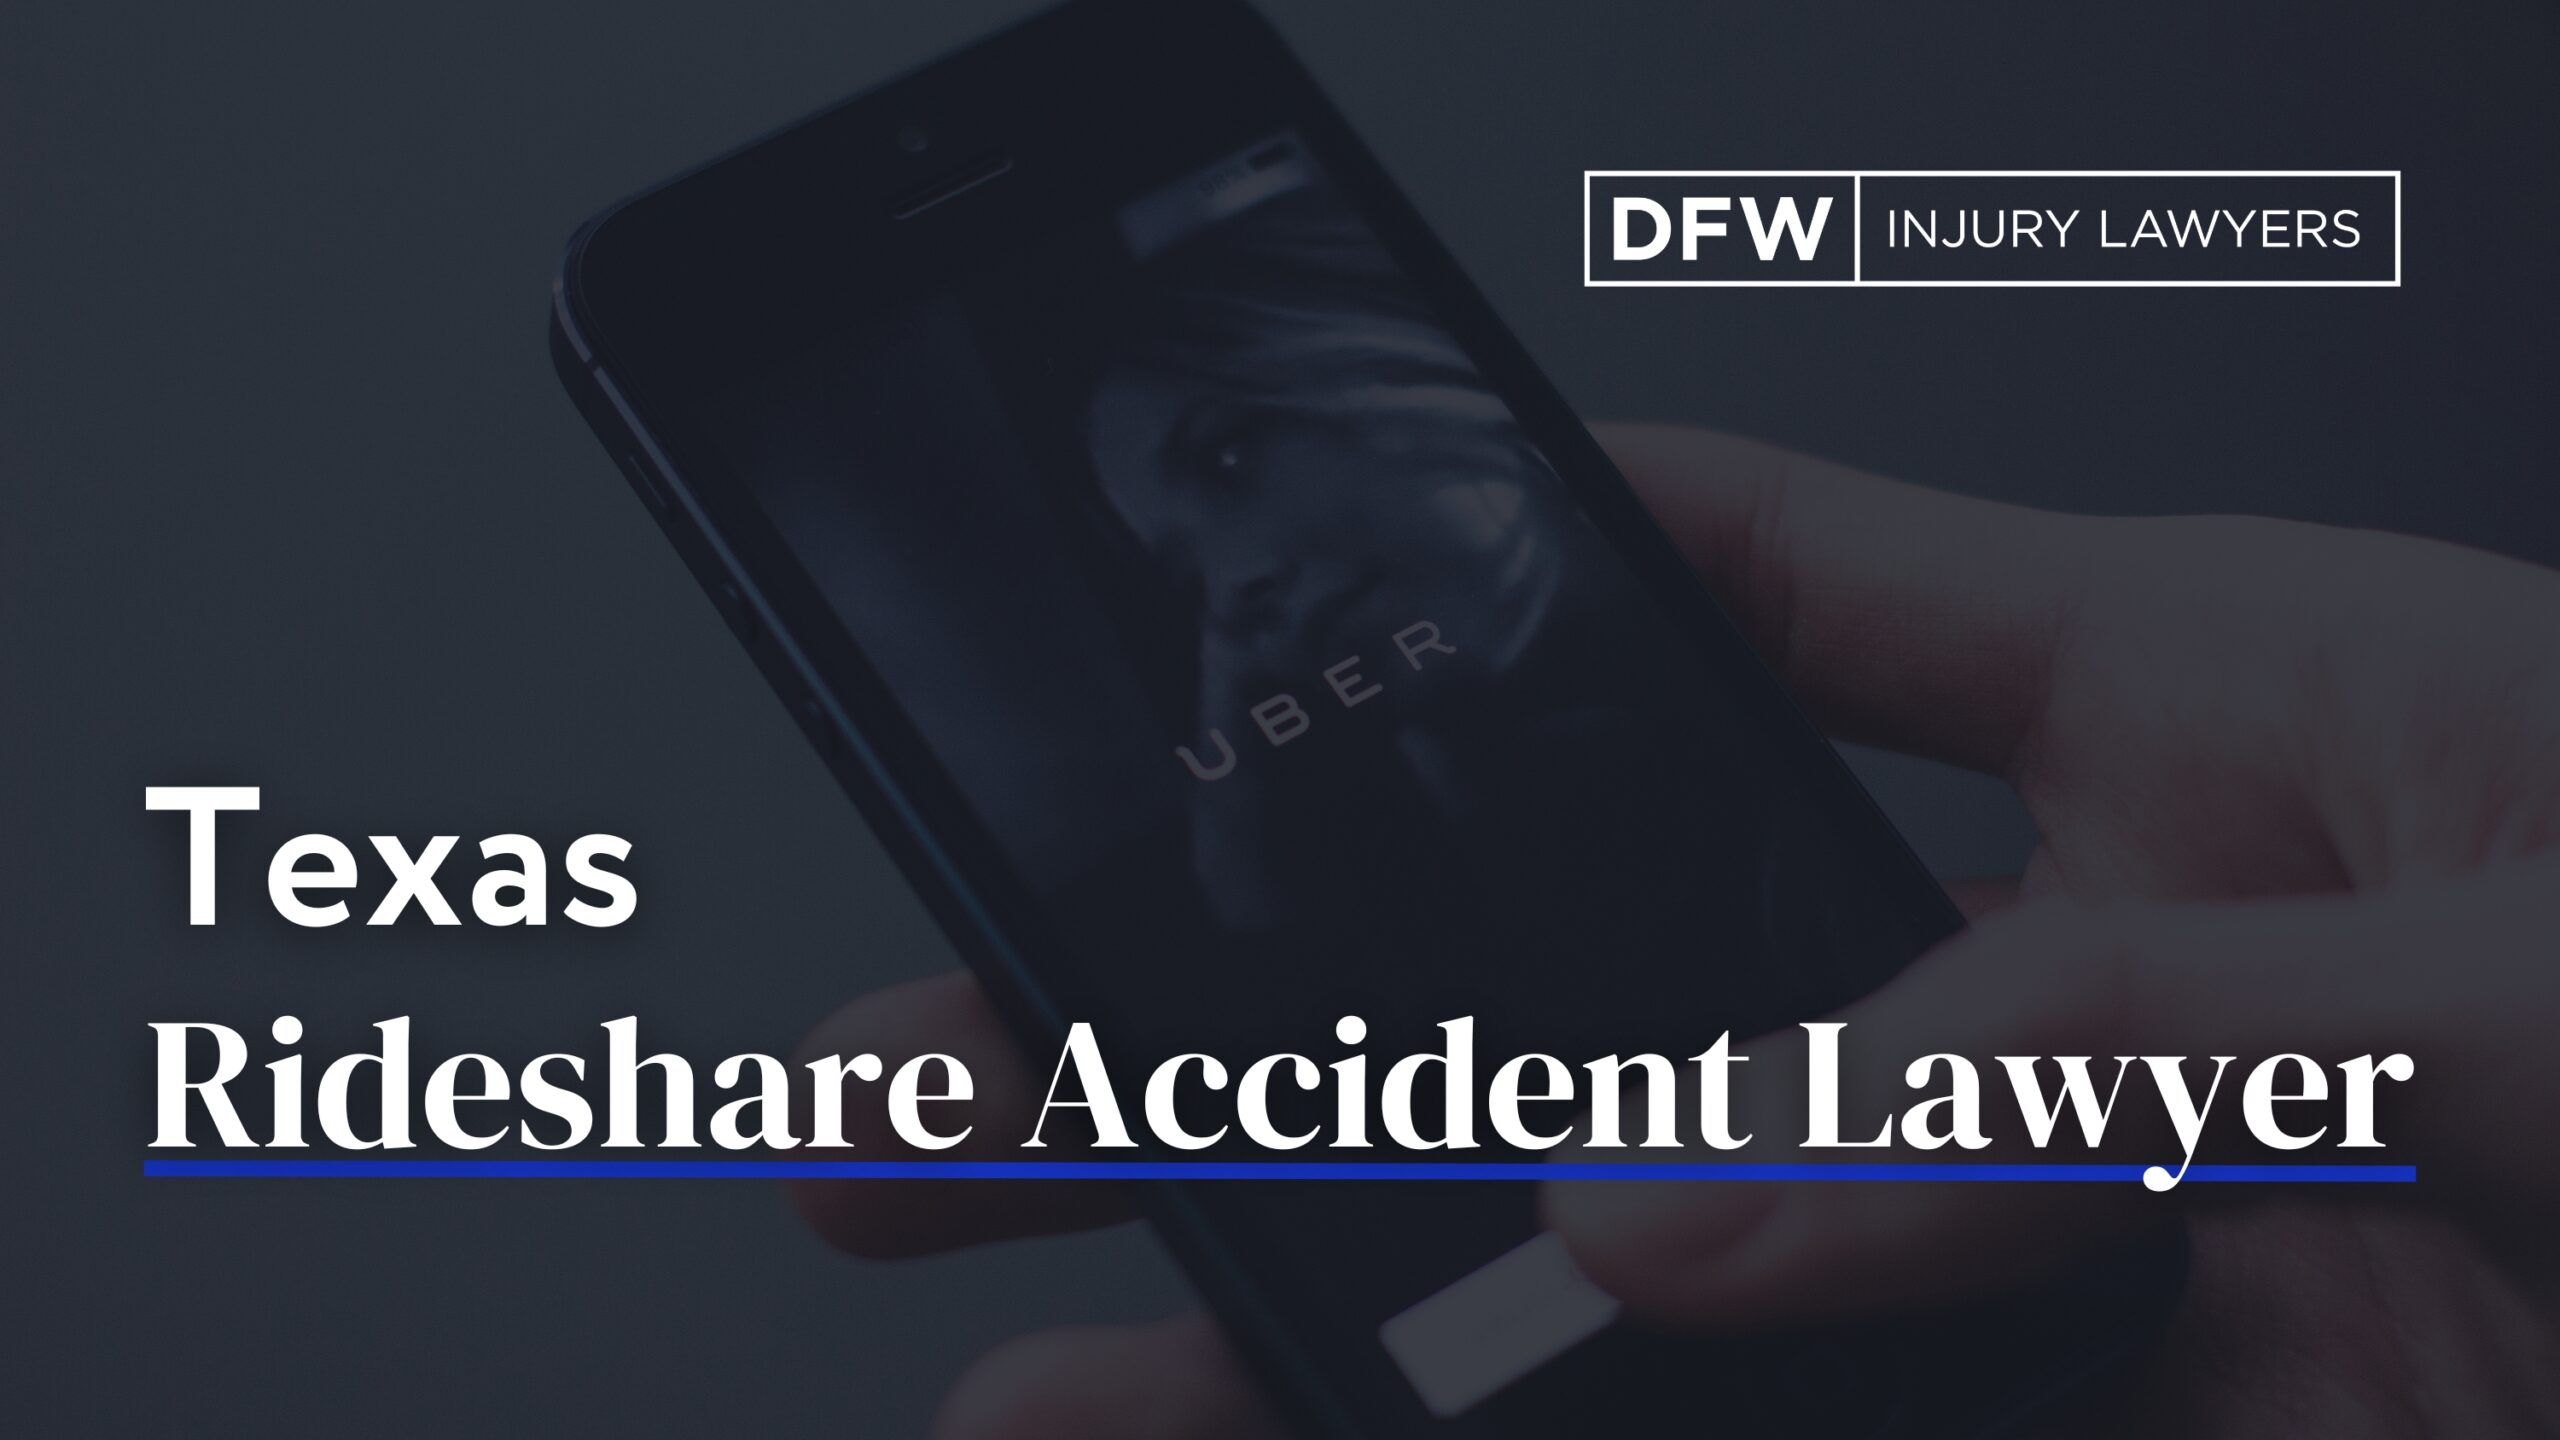 Texas Rideshare accident lawyer - DFW